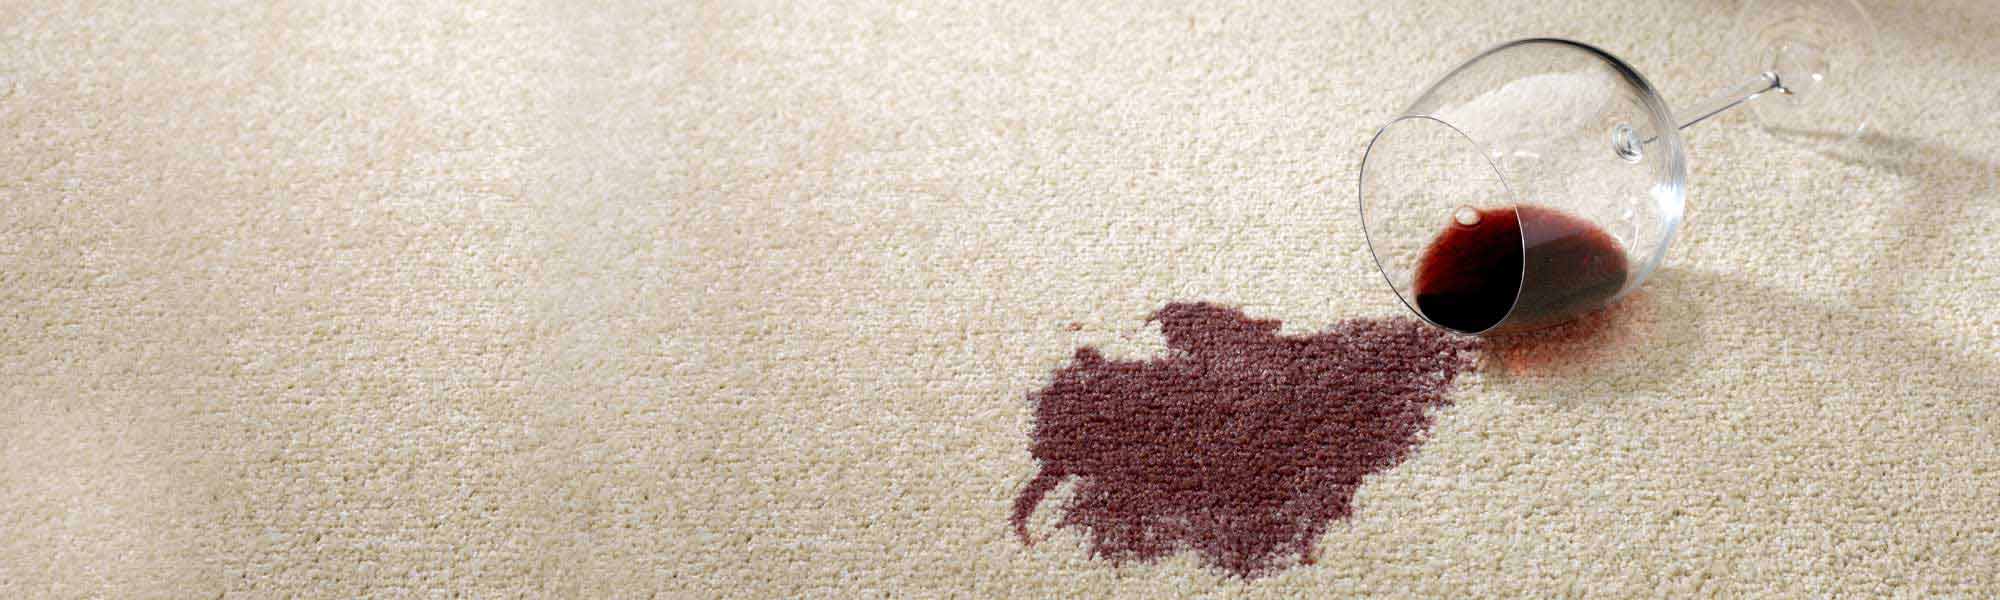 Professional Stain Removal Service by Columbus Chem-Dry in Columbus Indiana